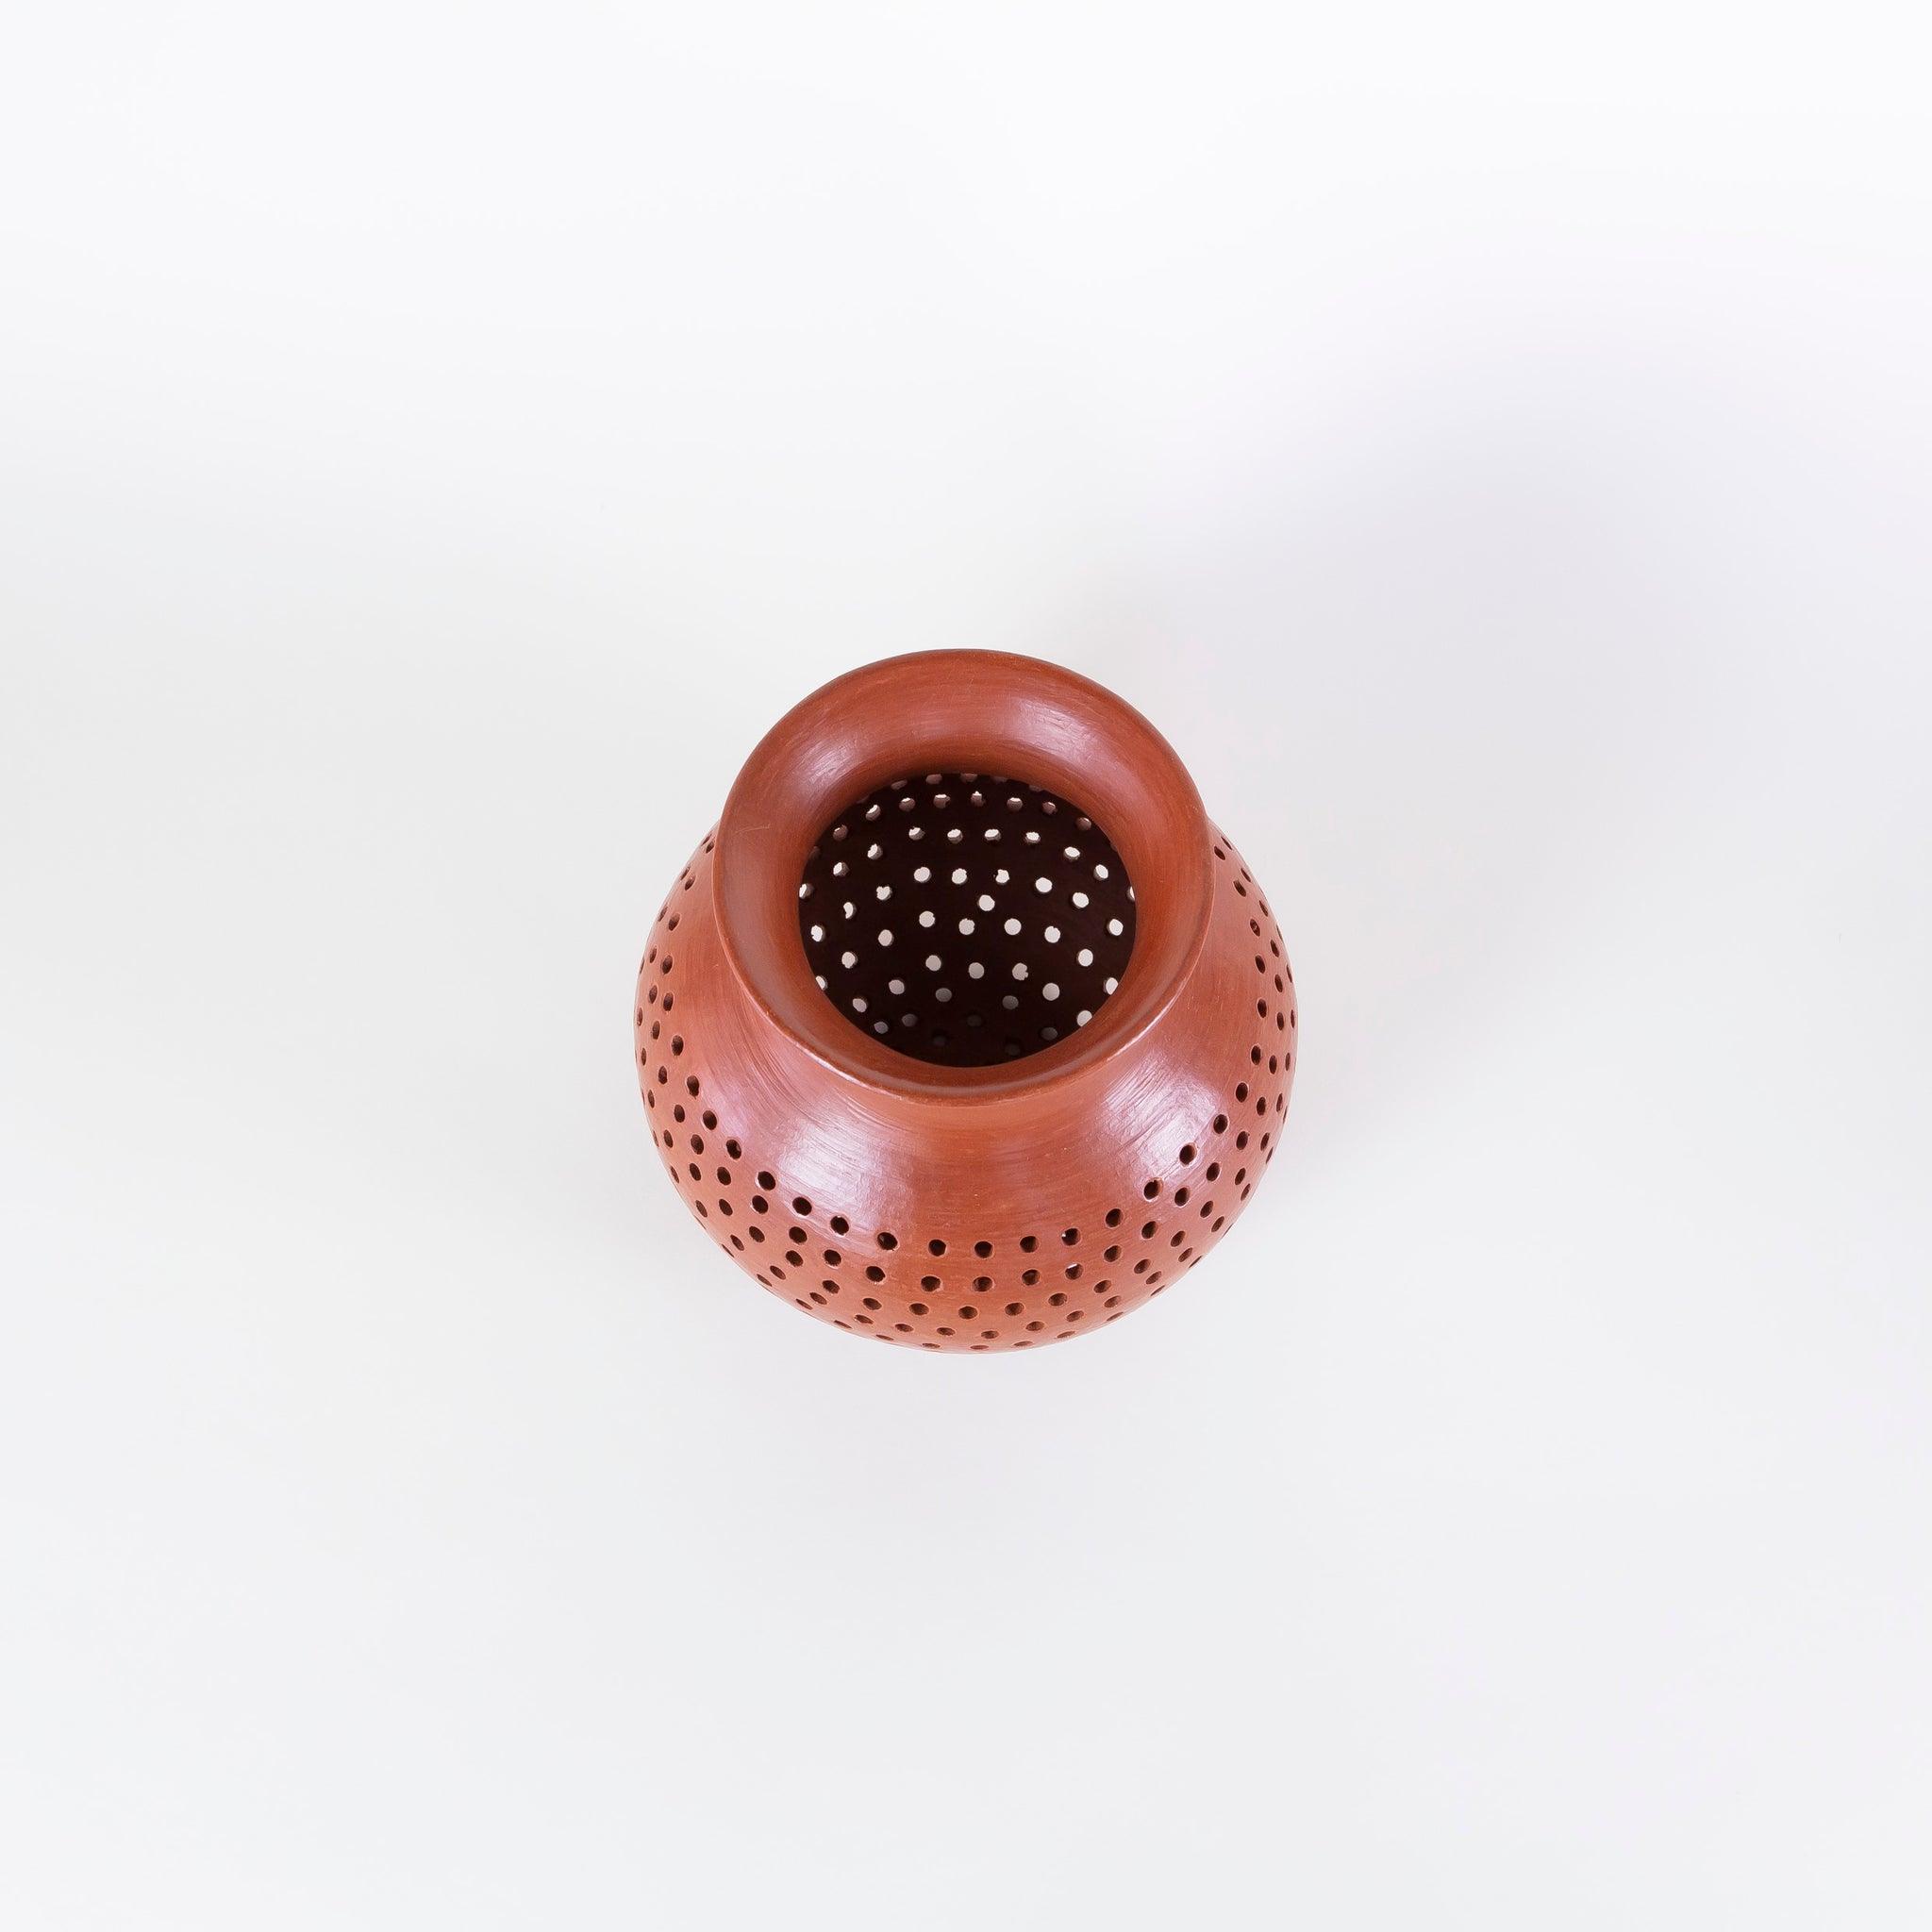 Oaxacan Red Clay Colander Pot Media 1 of 6